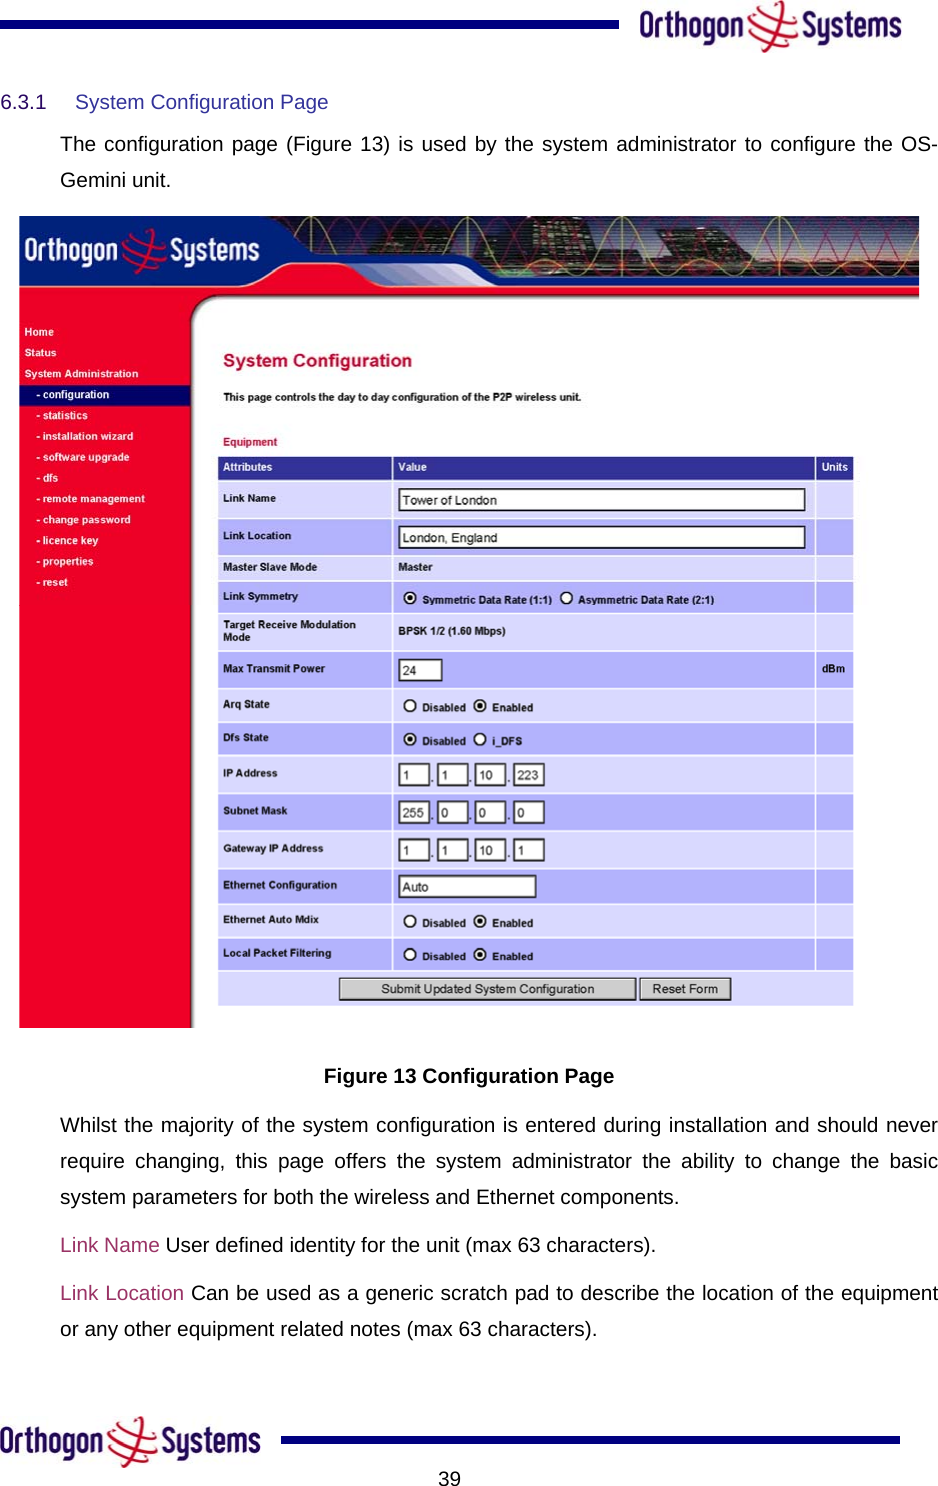           396.3.1  System Configuration Page  The configuration page (Figure 13) is used by the system administrator to configure the OS-Gemini unit.  Figure 13 Configuration Page Whilst the majority of the system configuration is entered during installation and should never require changing, this page offers the system administrator the ability to change the basic system parameters for both the wireless and Ethernet components.  Link Name User defined identity for the unit (max 63 characters).  Link Location Can be used as a generic scratch pad to describe the location of the equipment or any other equipment related notes (max 63 characters).  